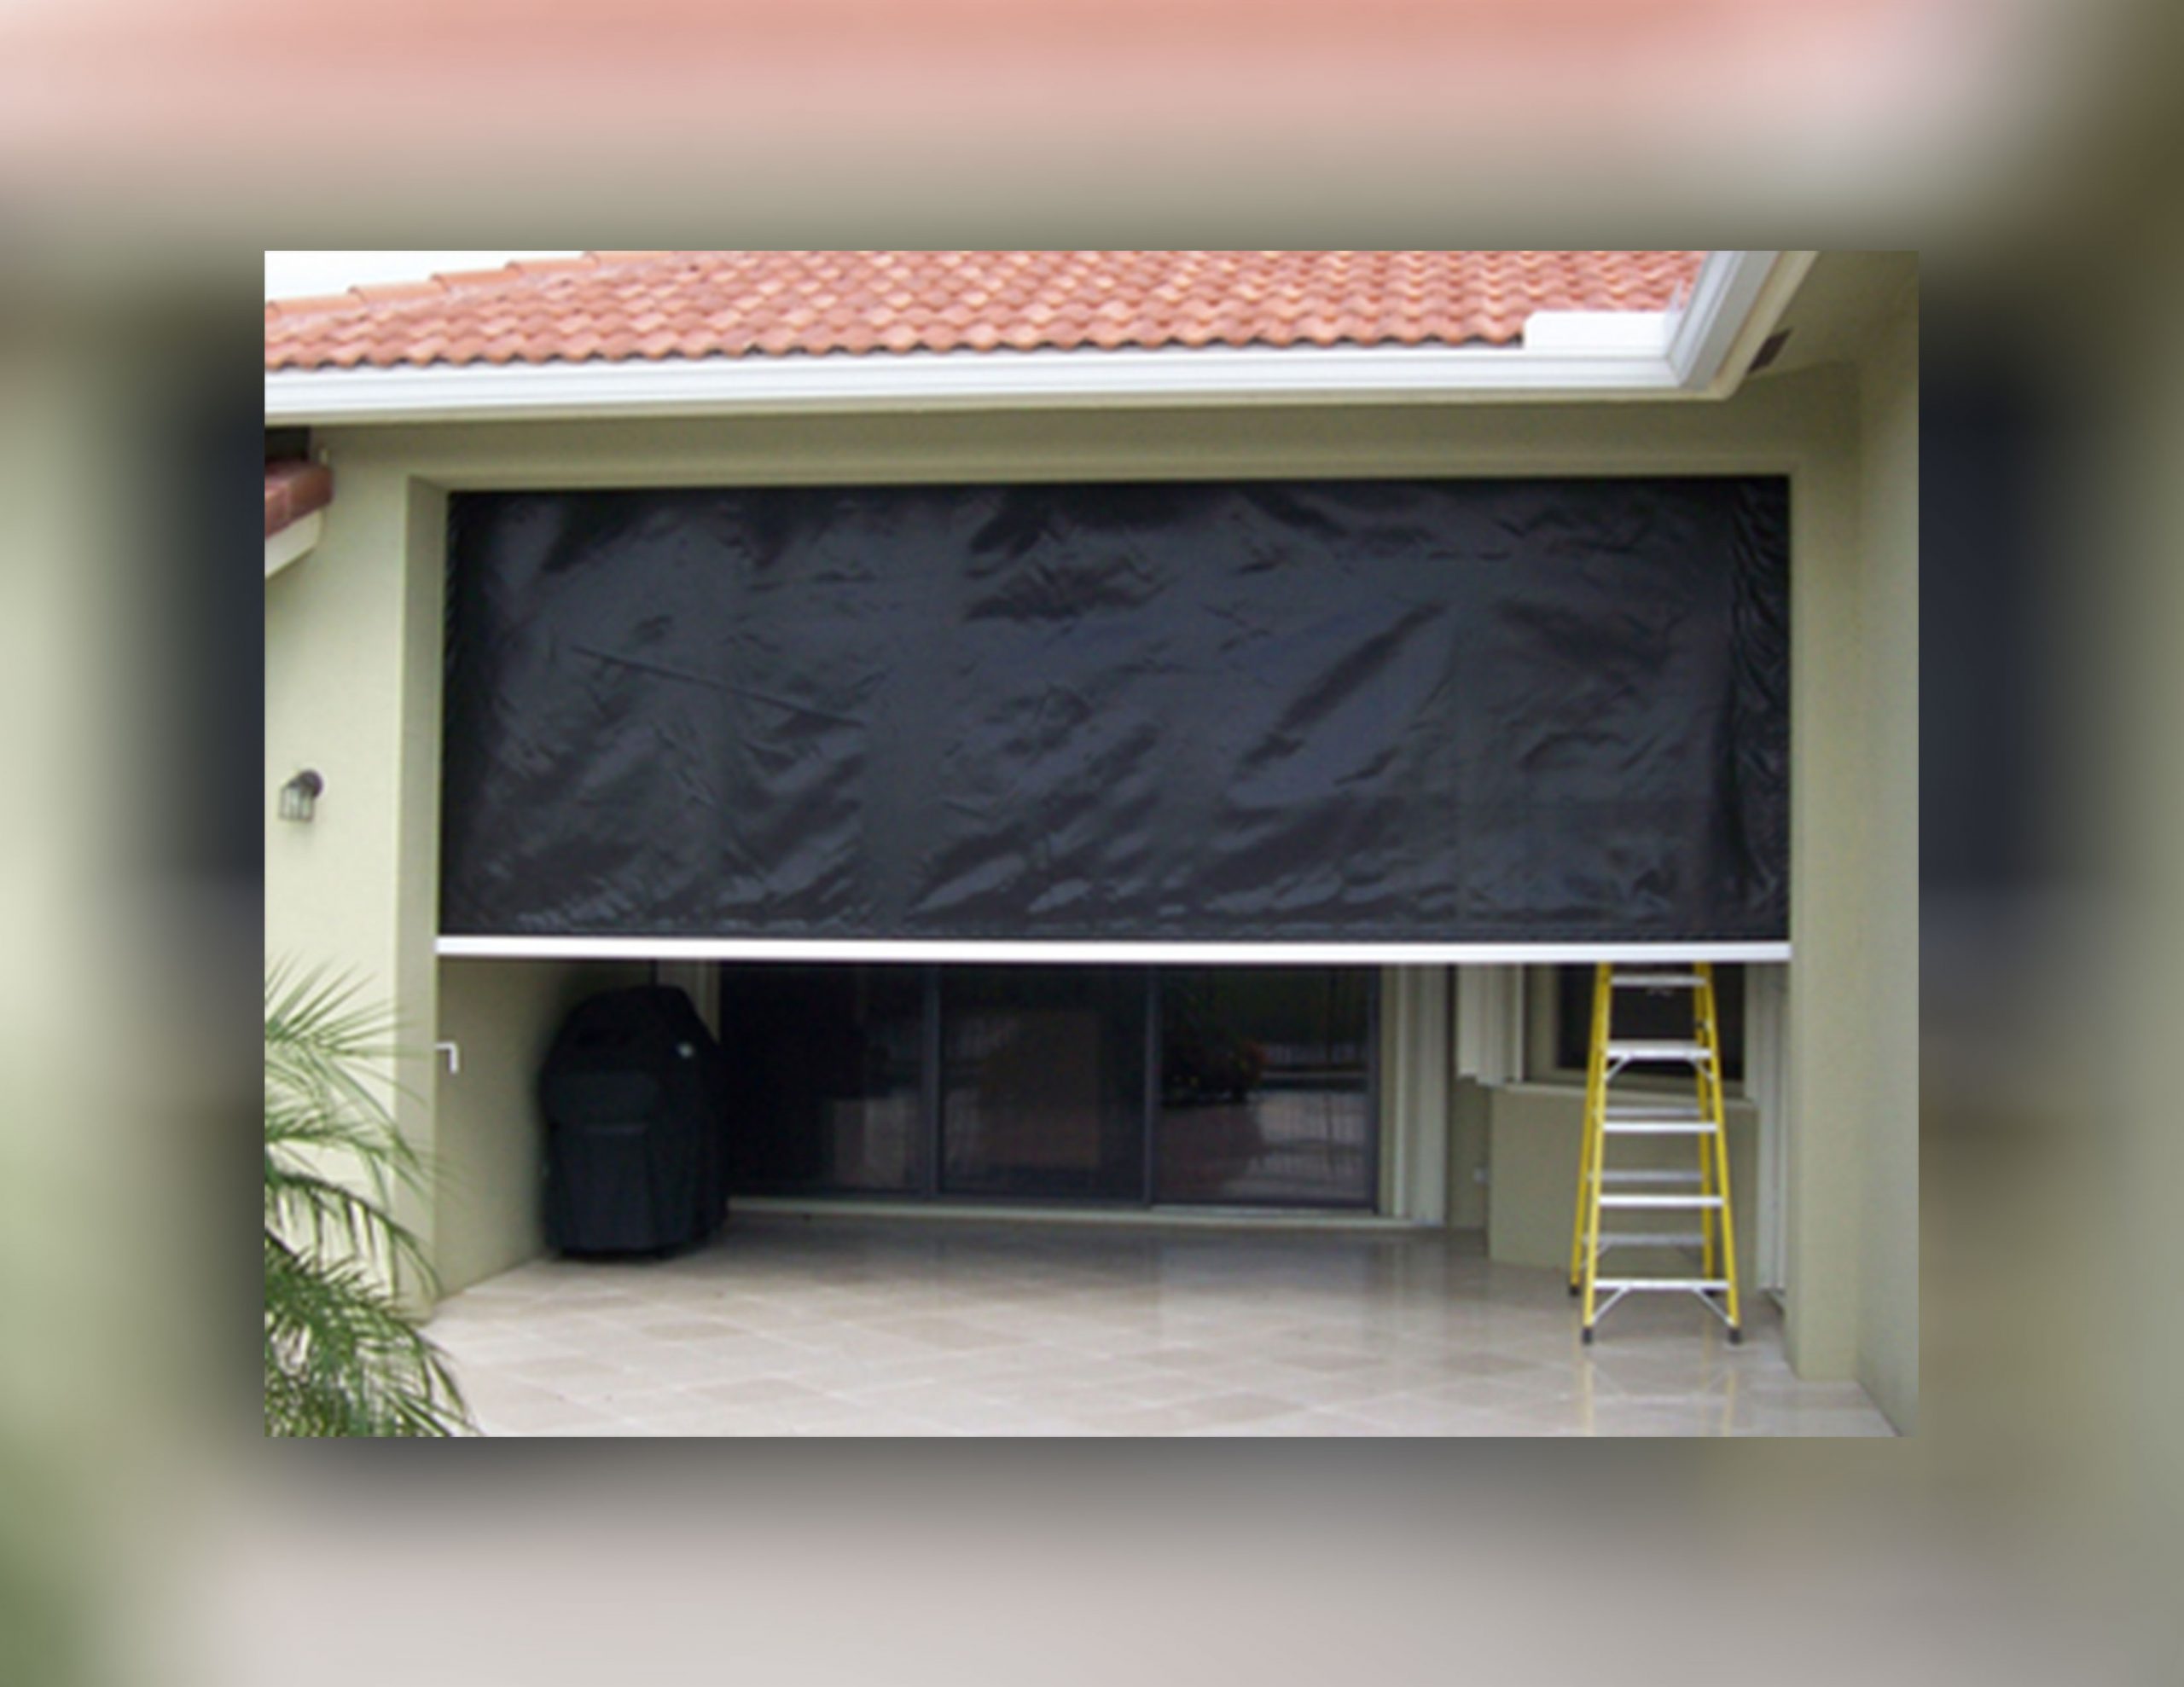 Read more about the article Hurricane Fabric Screens in Southwest Florida